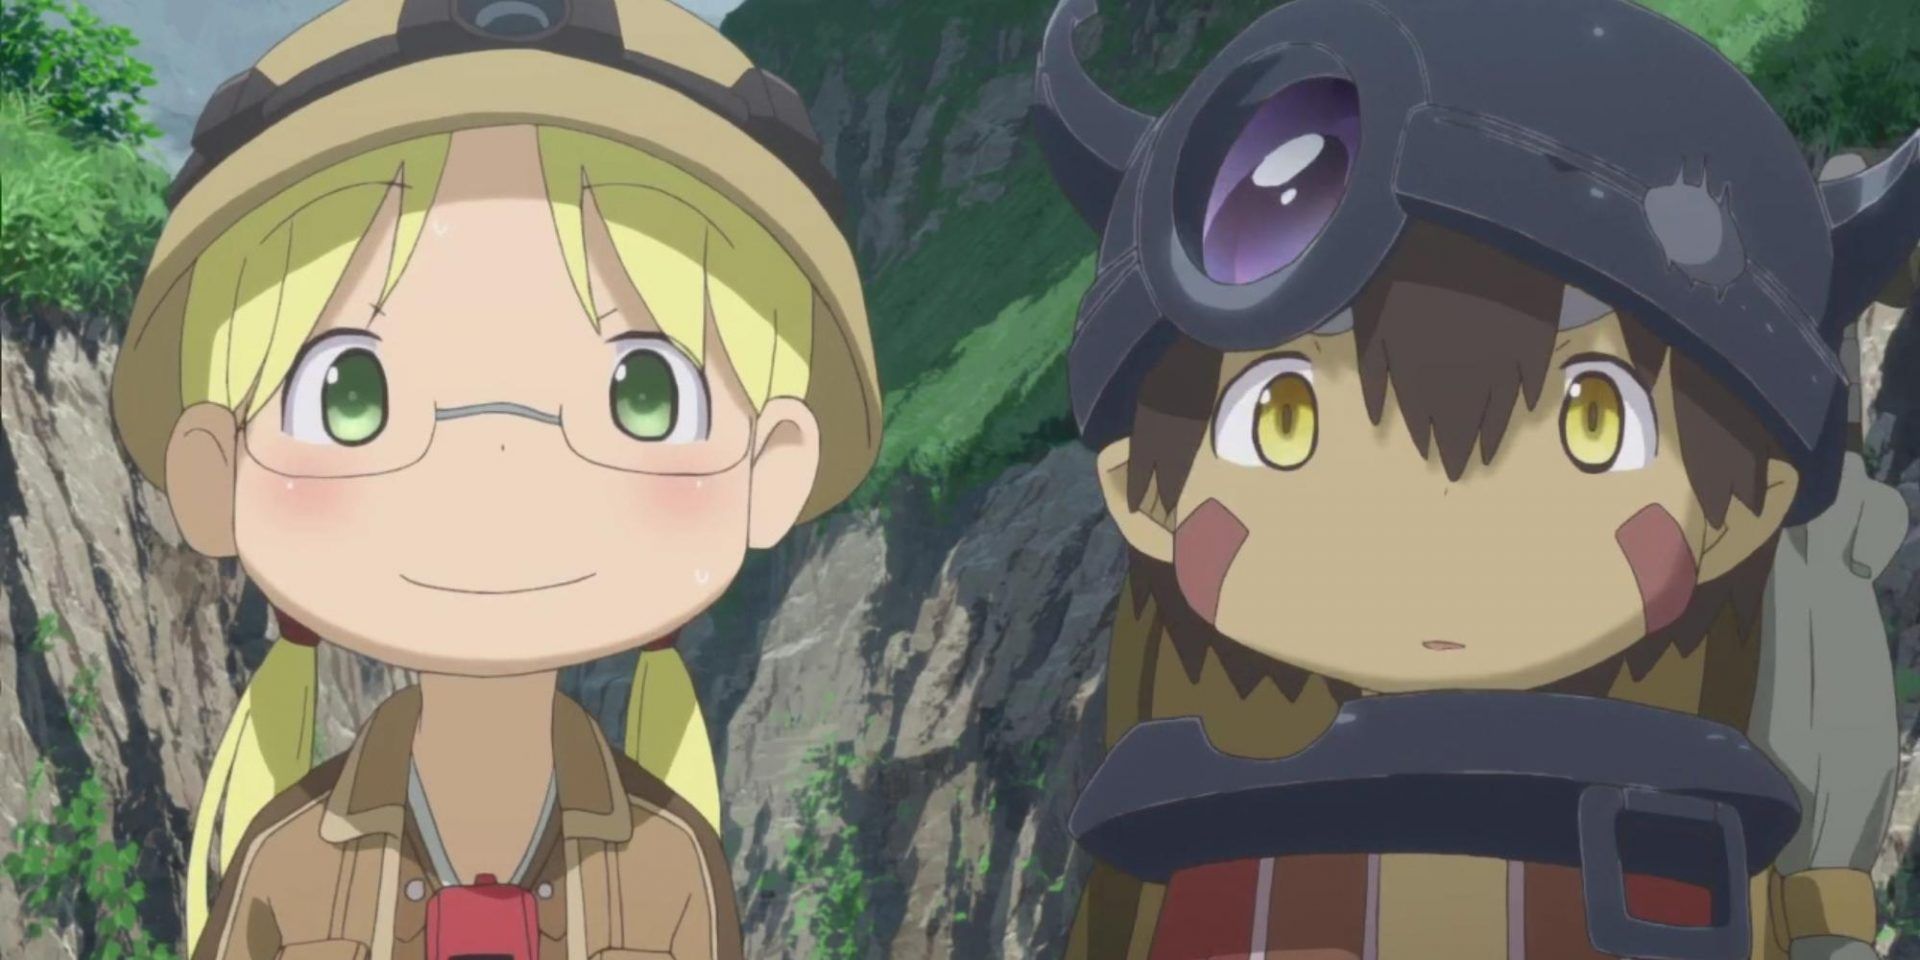 Made In Abyss Season 2 Episode 6 Review: Fighting For Value